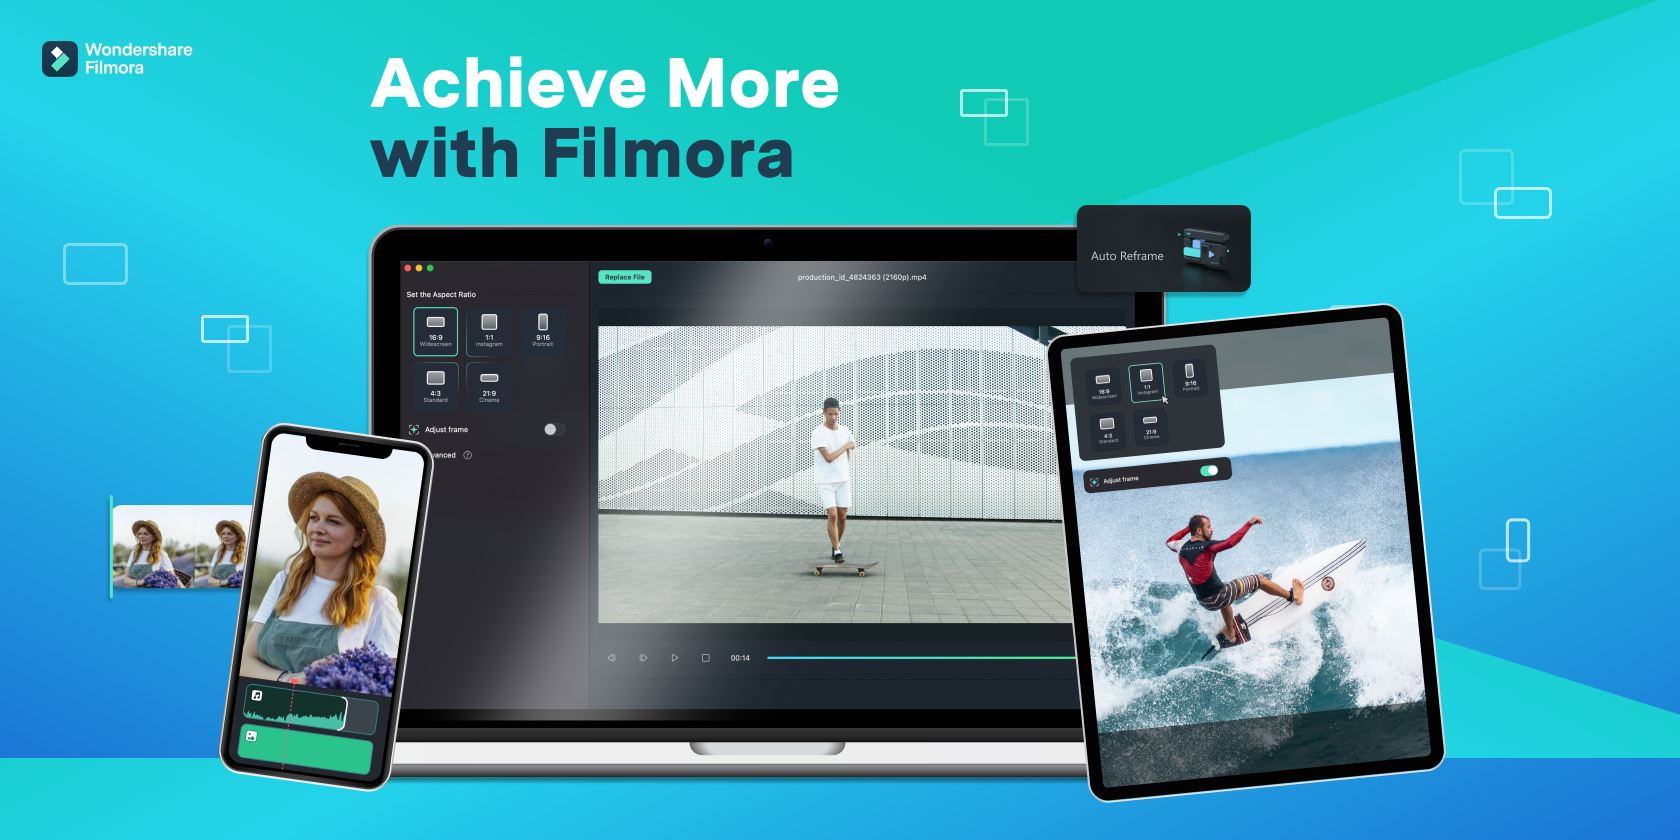 Wondershare Filmora software on tablet, phone, and laptop with blue background